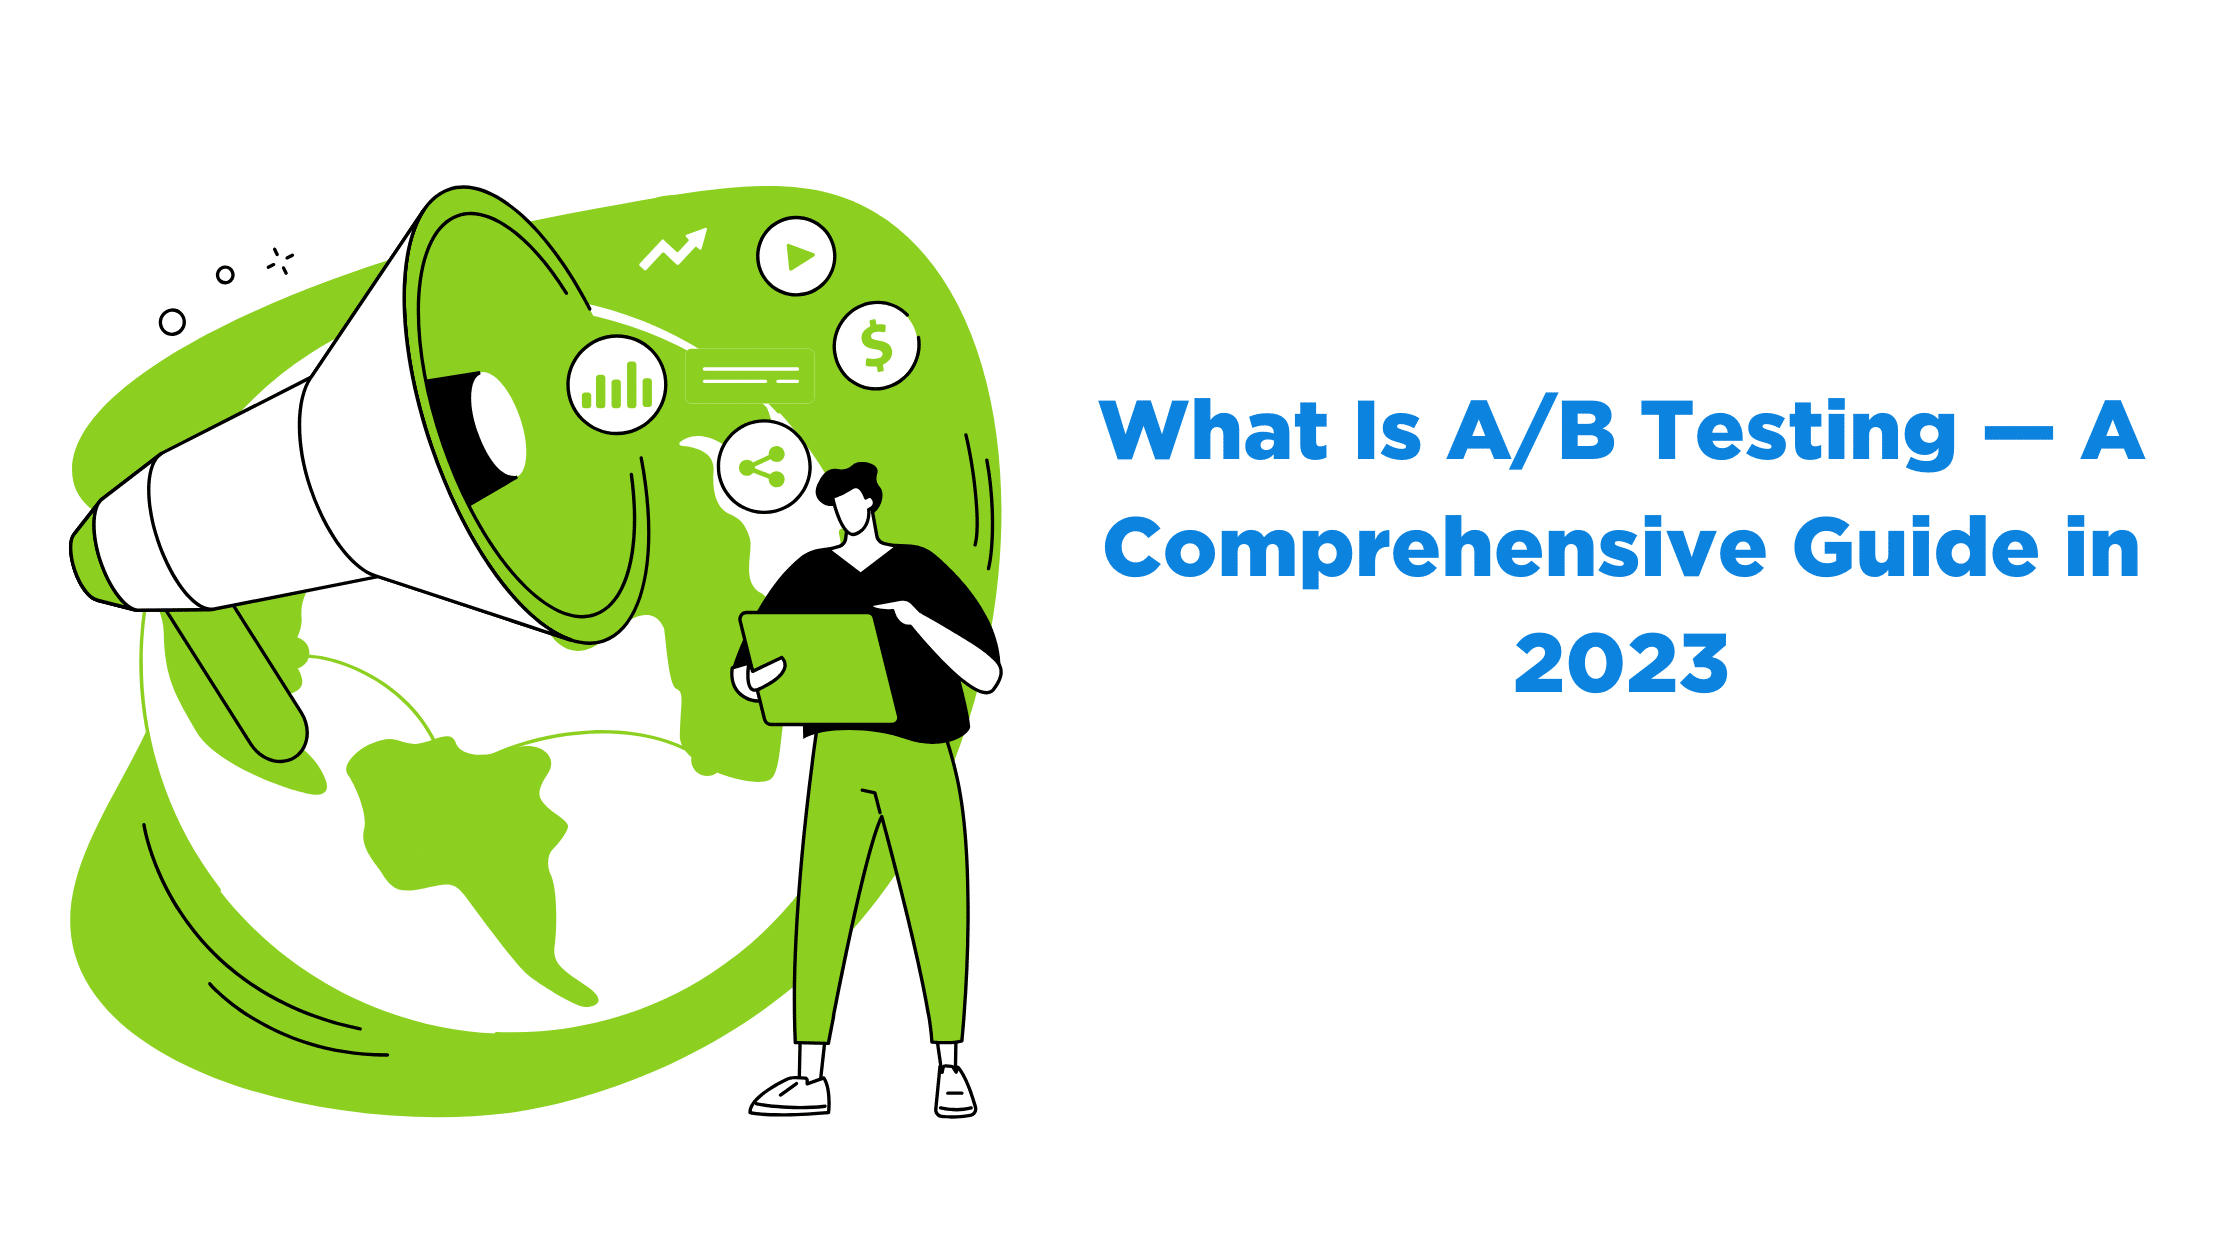 What Is A/B Testing — A Comprehensive Guide in 2023